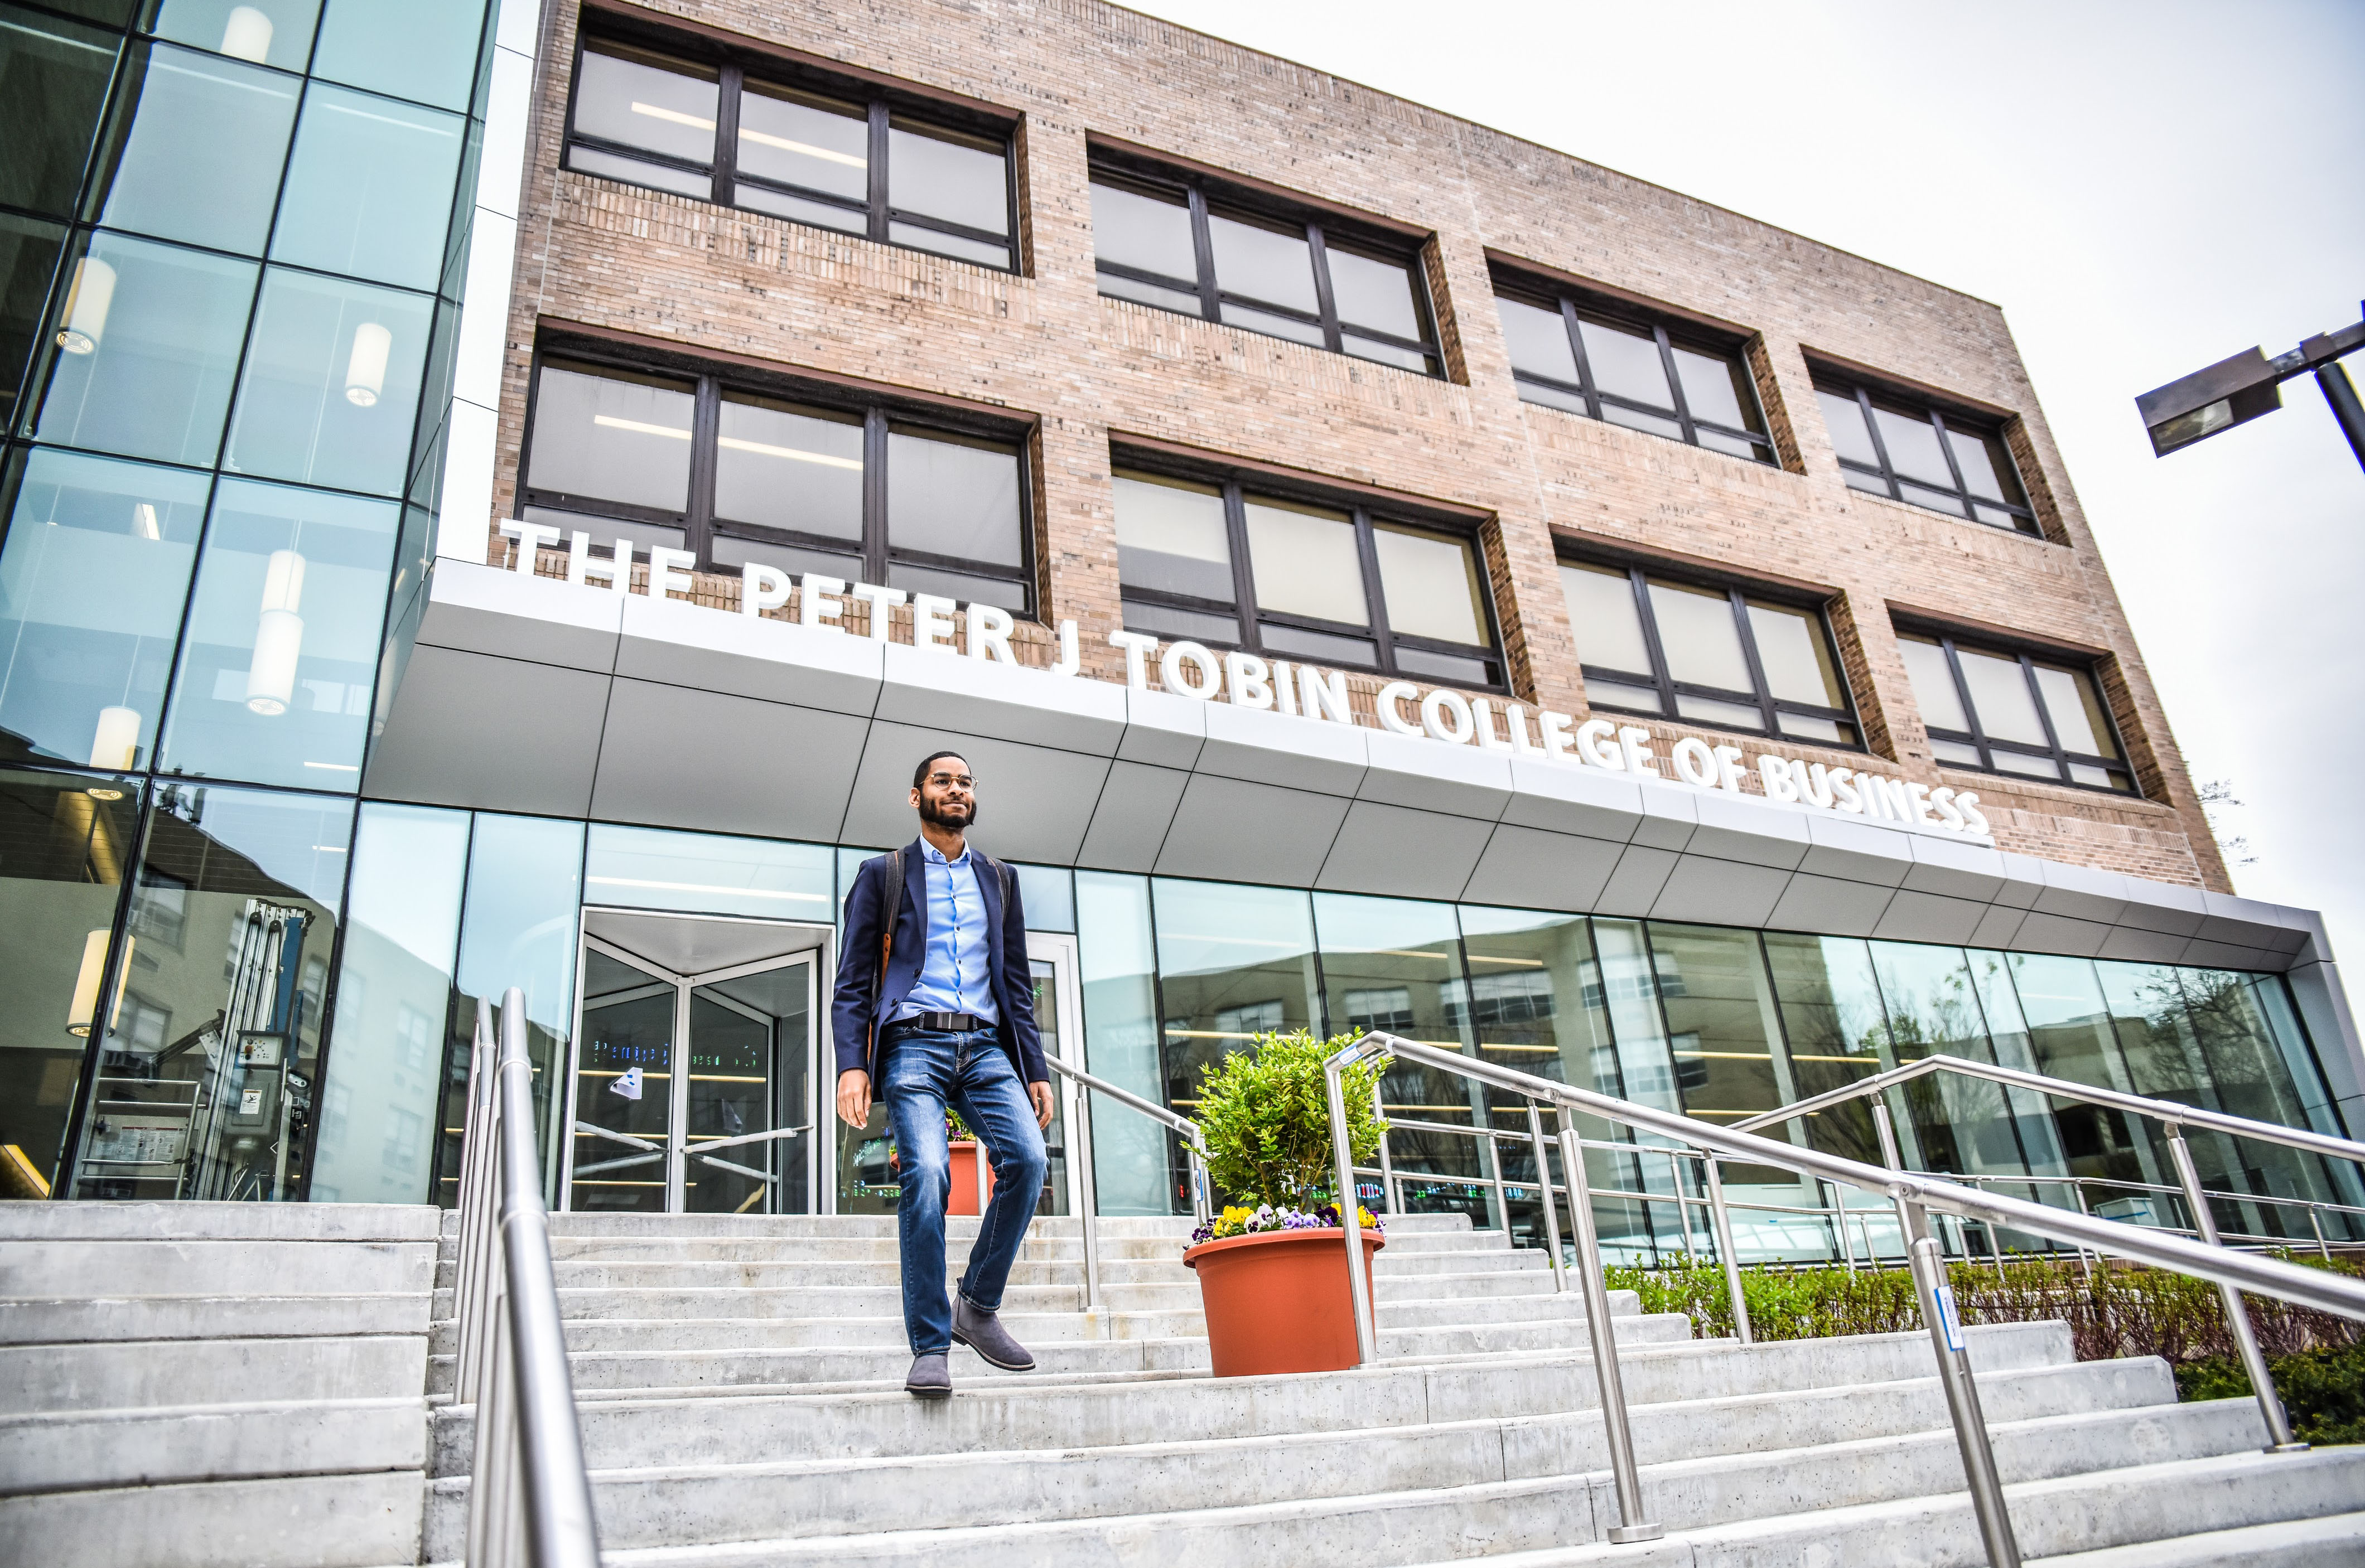 The Peter J Tobin College Of Business At St John S University Ranked As One Of The Best Undergraduate Business Programs Of 17 By Poets Quants St John S University